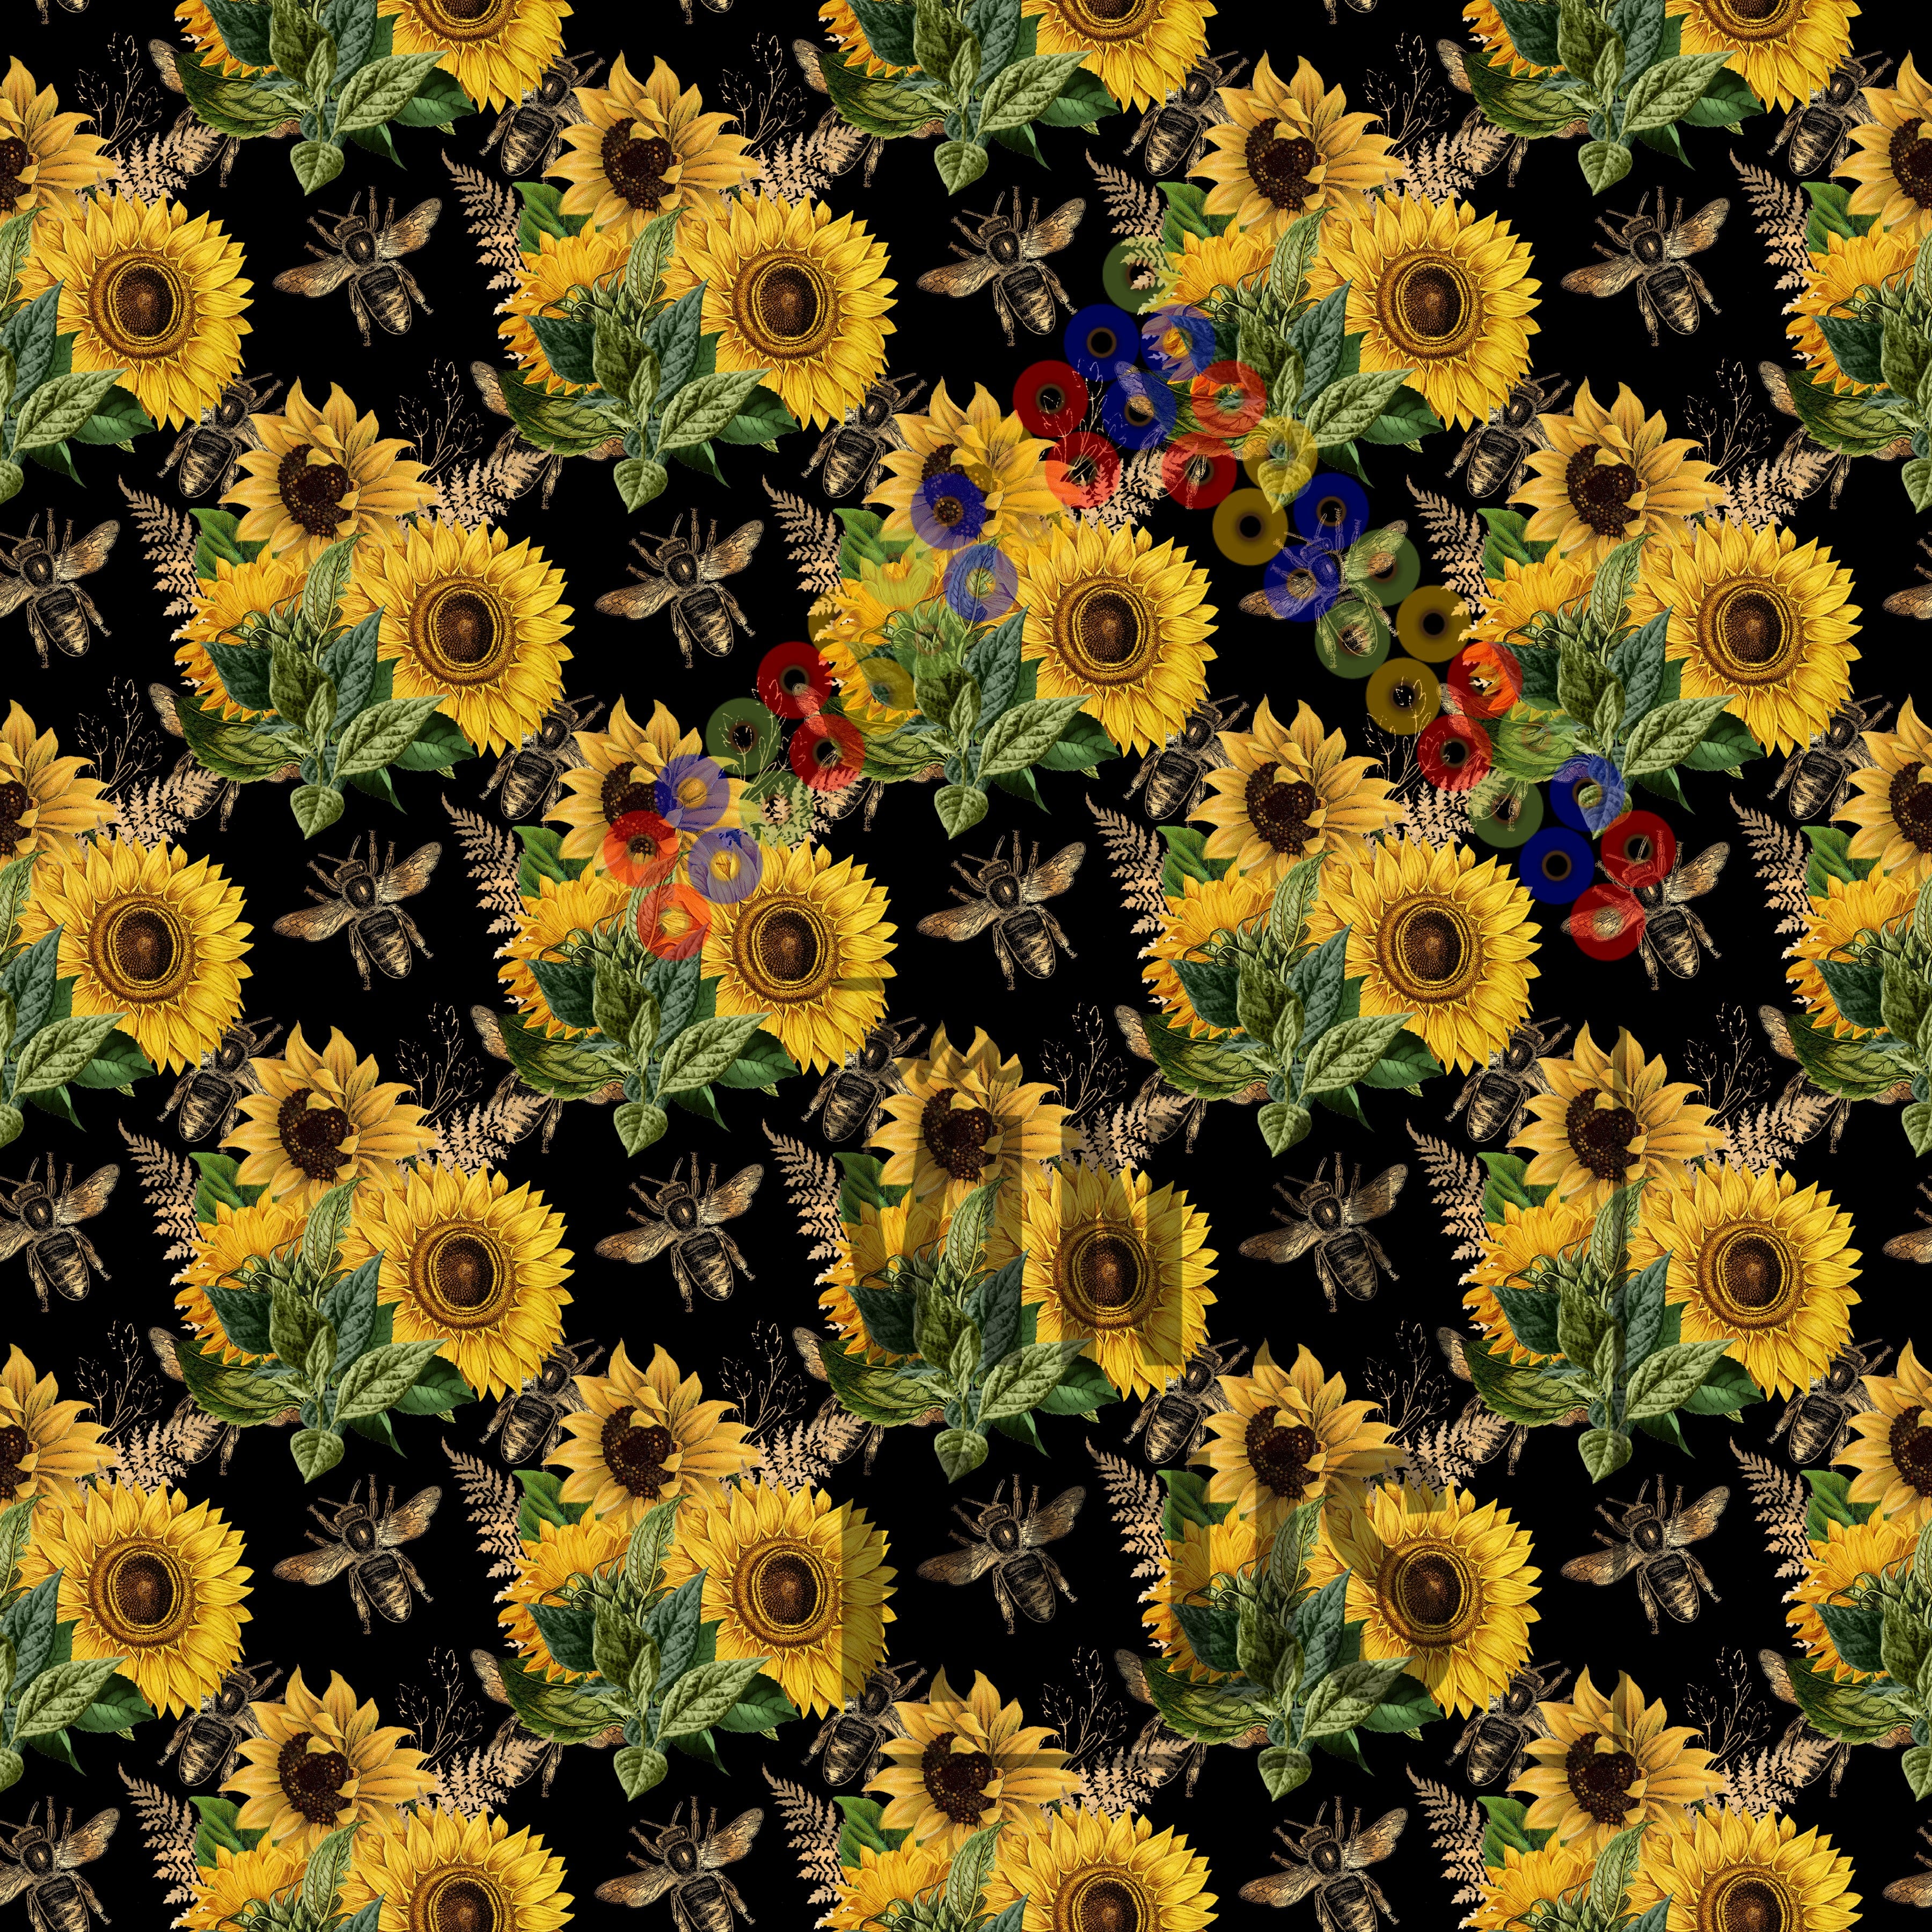 Sunflower and Bee with Black Background Pattern Vinyl 12" x 12" - The Vinyl Haus